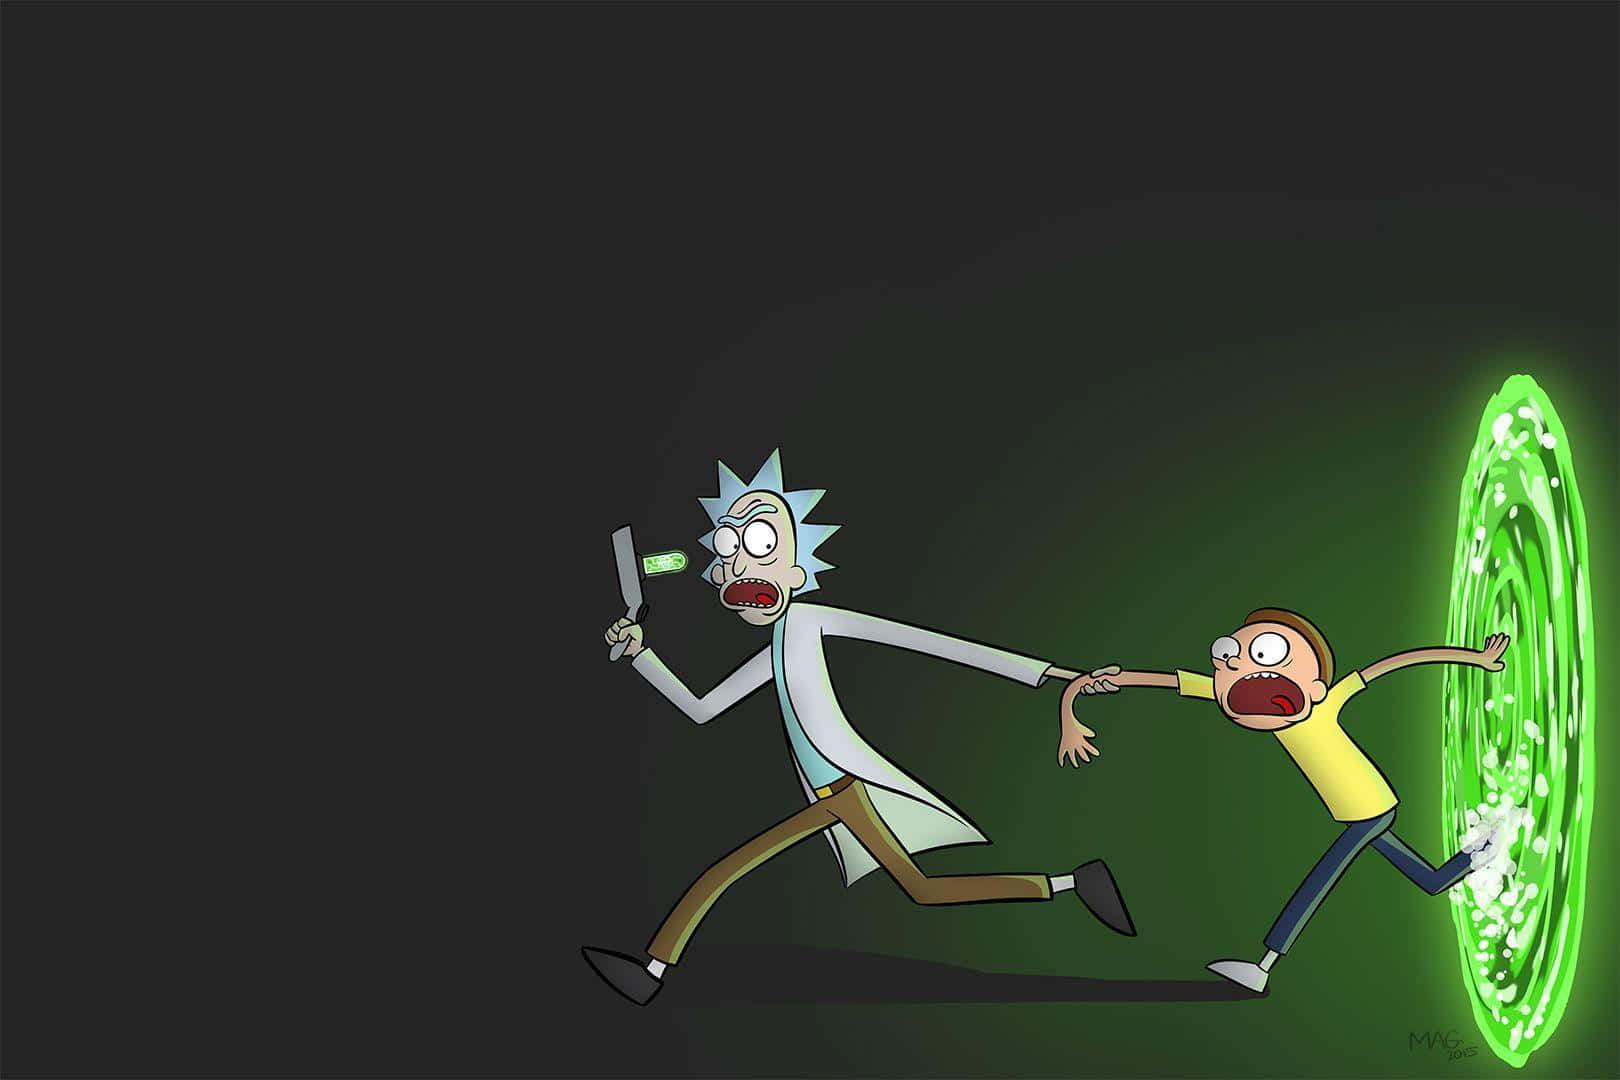 "Stay connected with the Rick and Morty universe, powered by your Macbook" Wallpaper